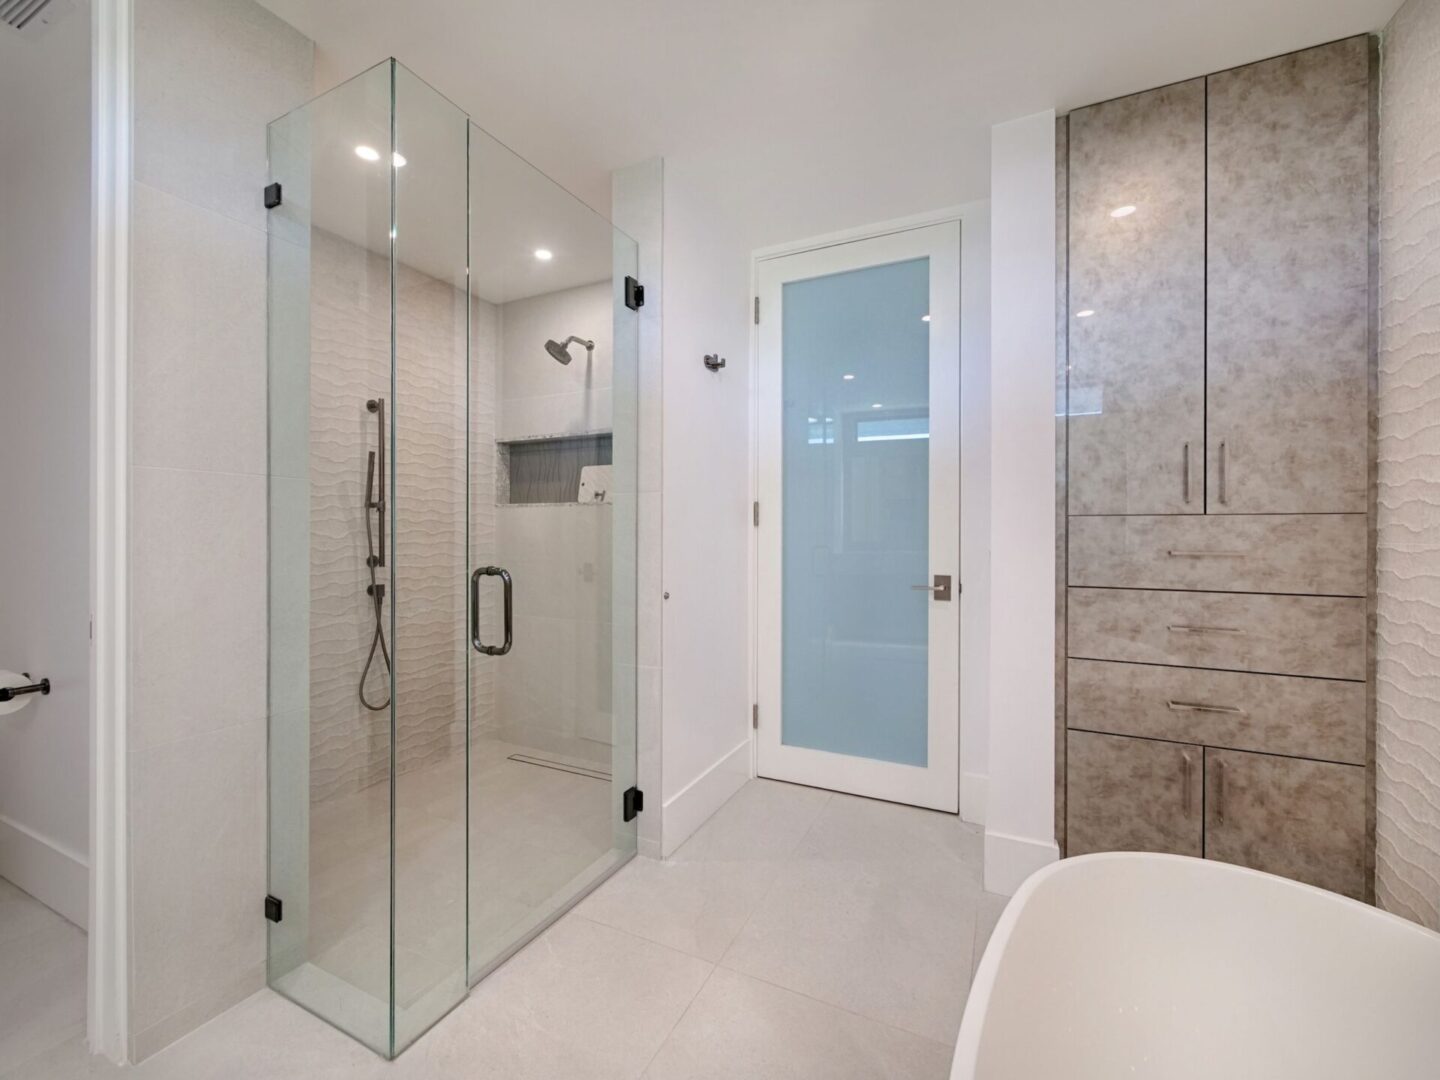 A bathroom with a shower and tub in it